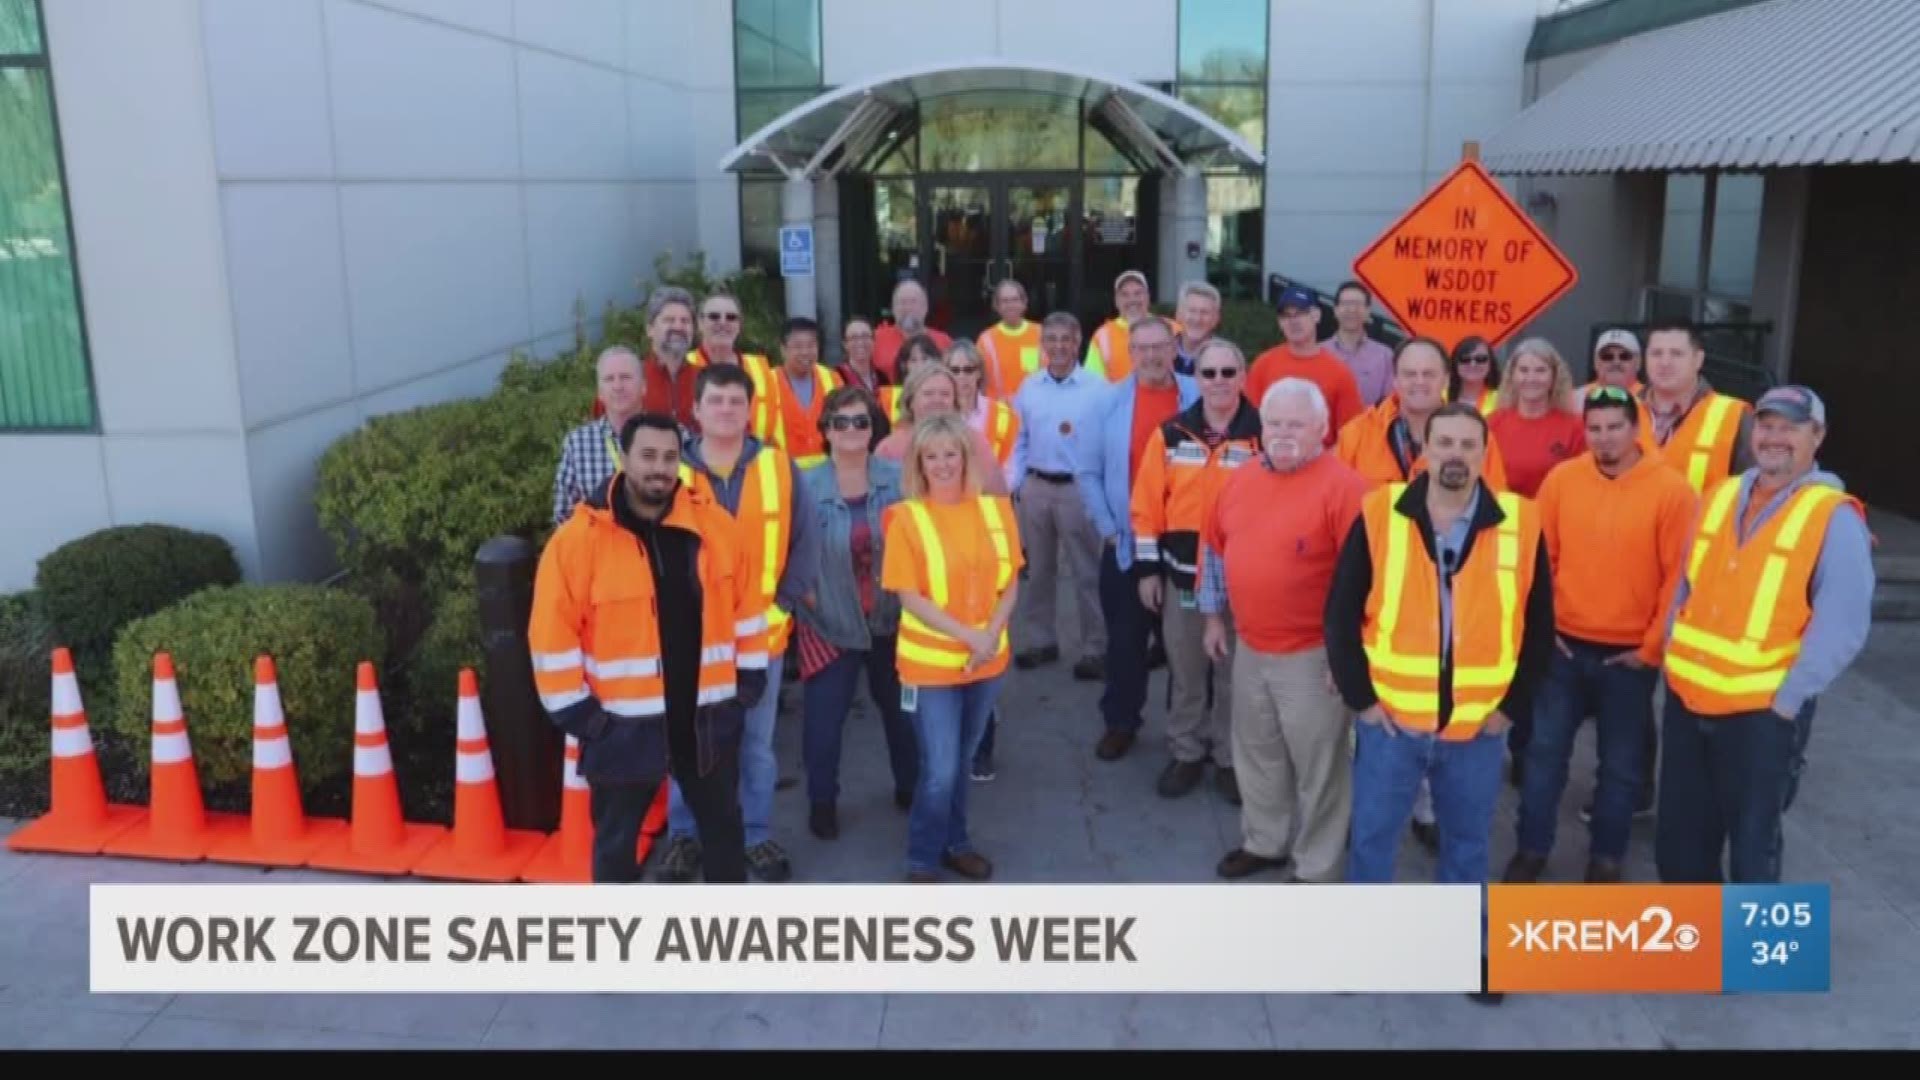 About 60 State Department of Transportation employees have lost their lives on the job since 1950. Last year, there were over 1,500 crashes in work zones.